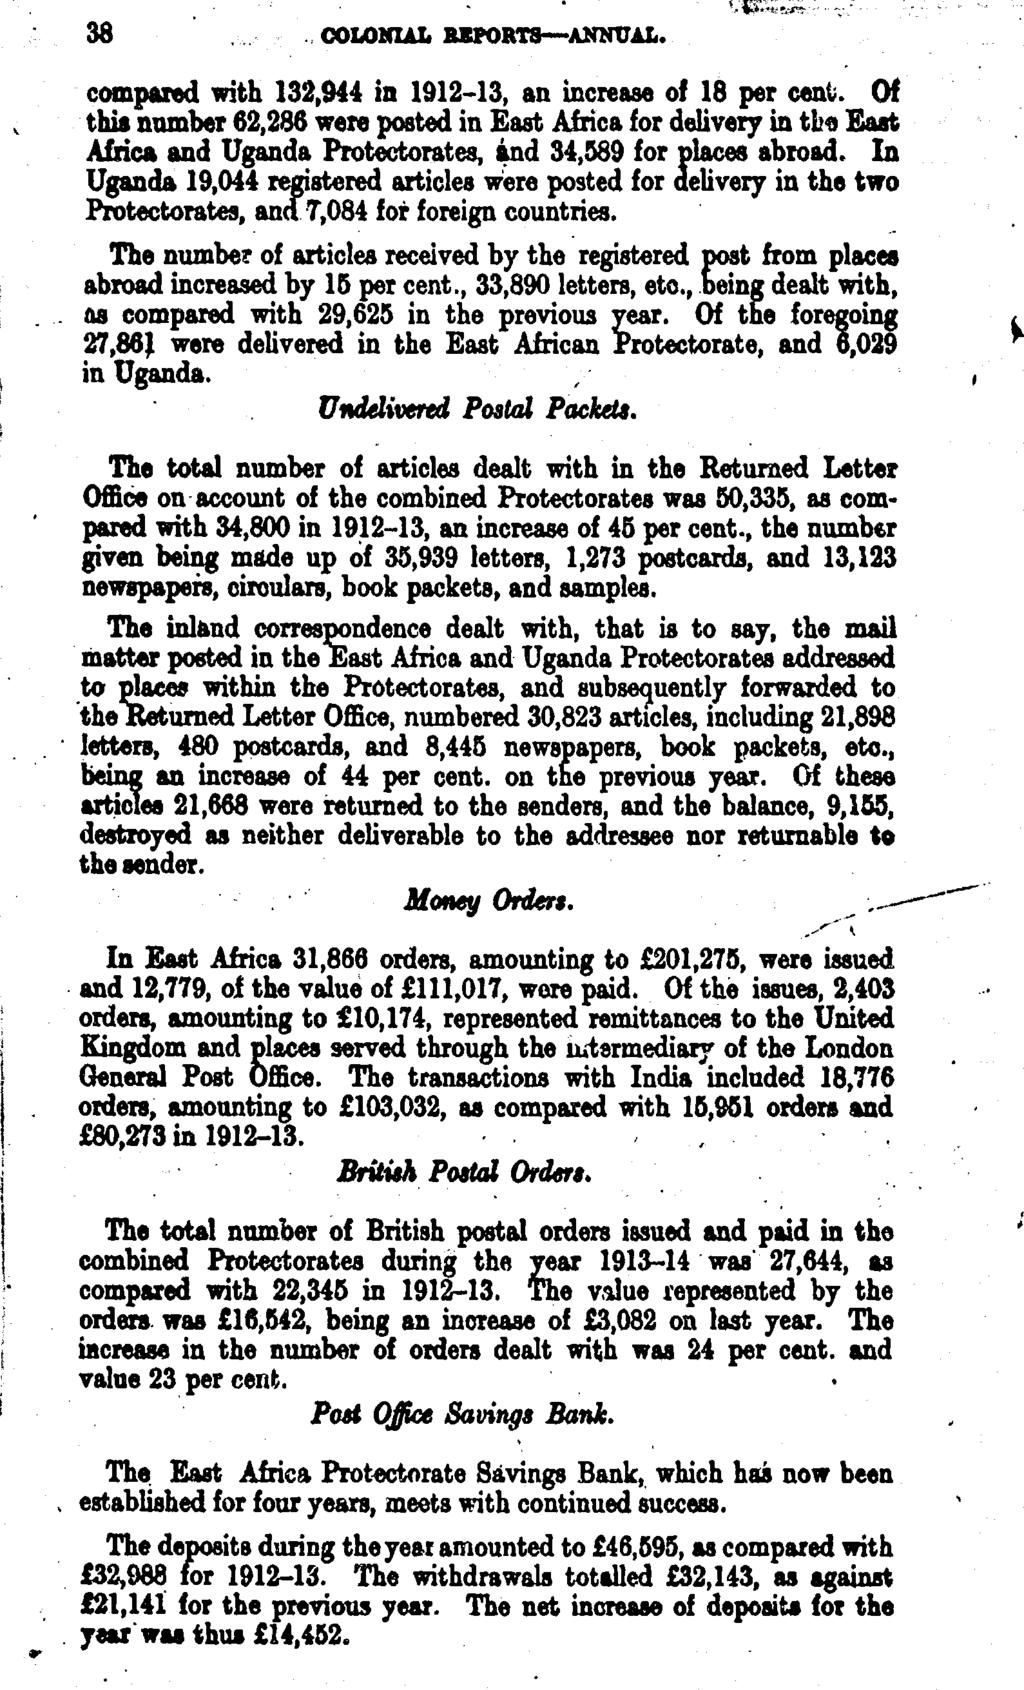 38 COLONIAL REPORTS ANNUAL compared with 132,944 in 1912-13, an increase o! 18 per cent.